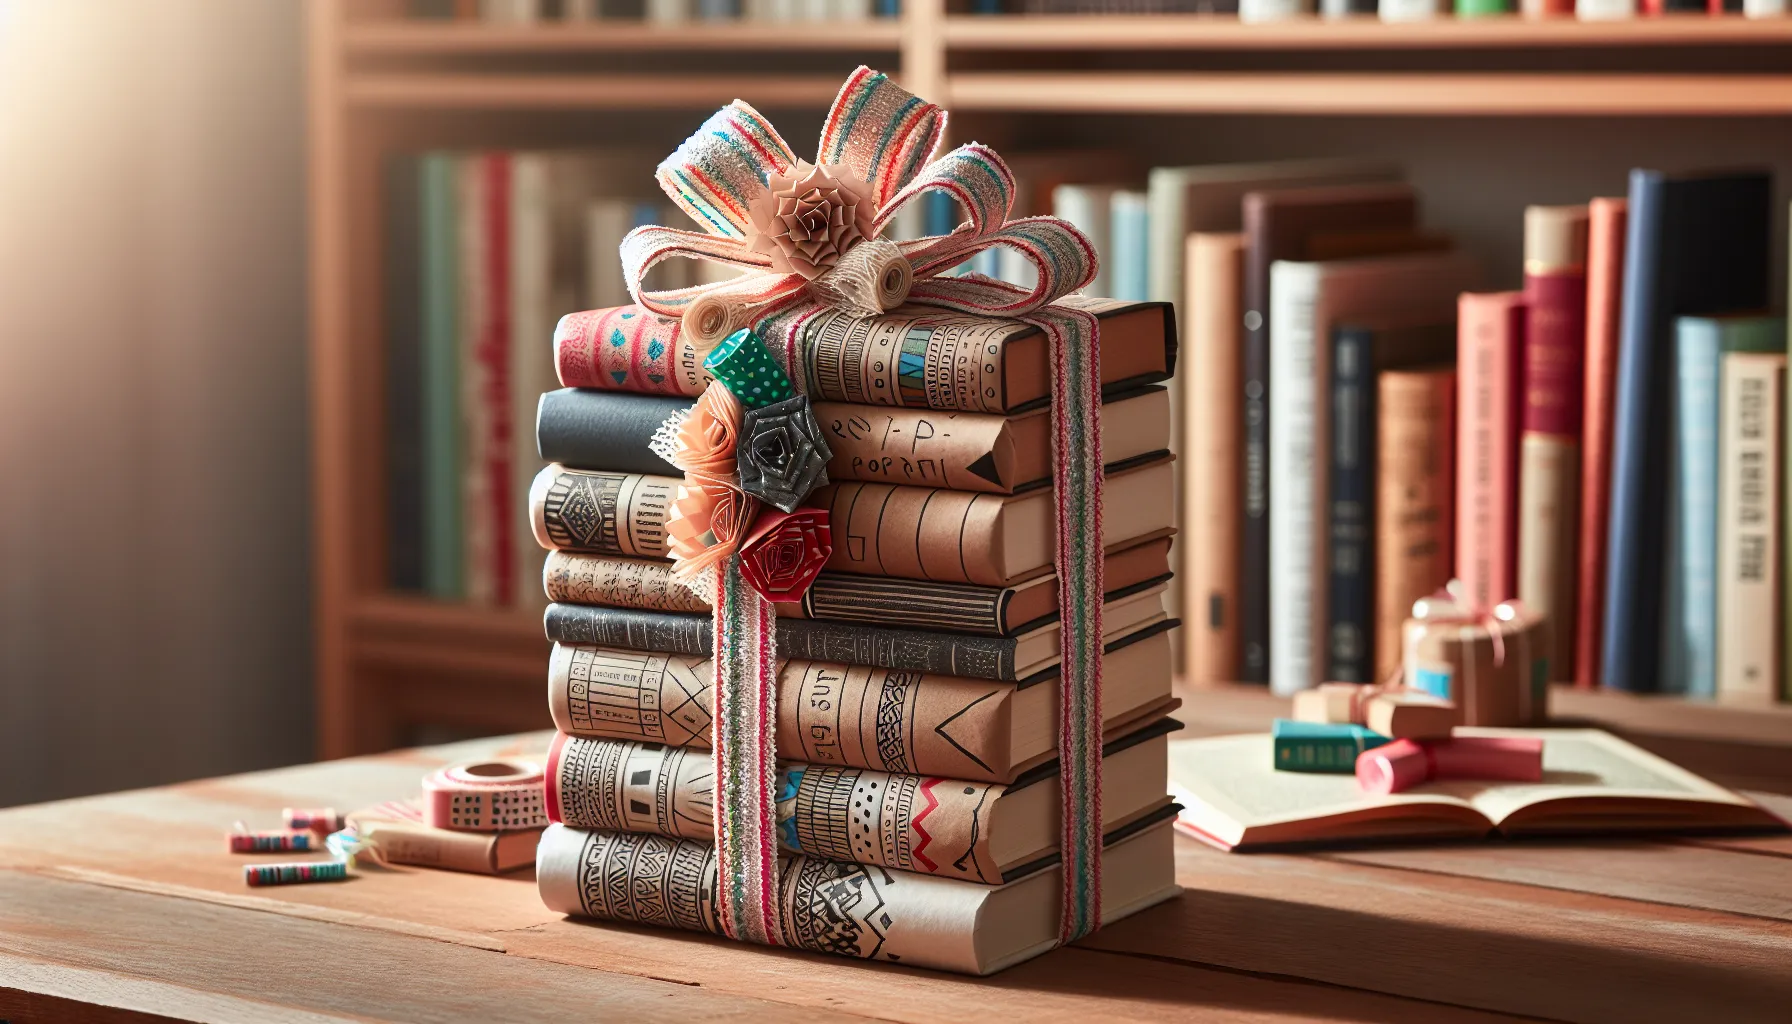 Beyond Bookmarks: 6 Creative Ways to Gift Books